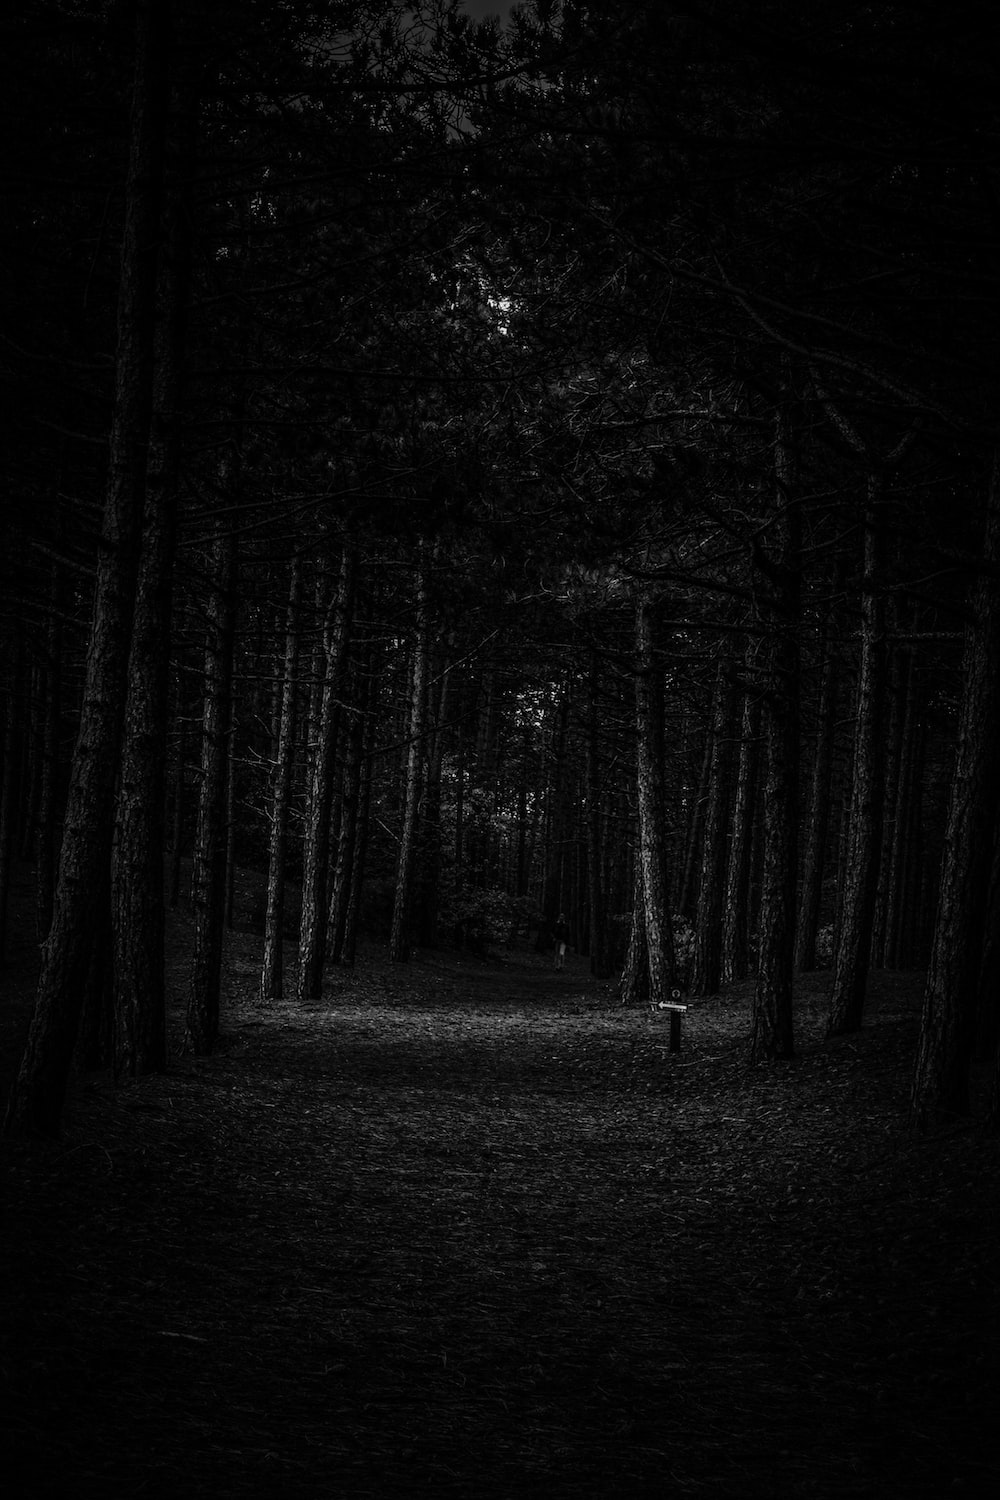 Dark forest pictures hd download free images on